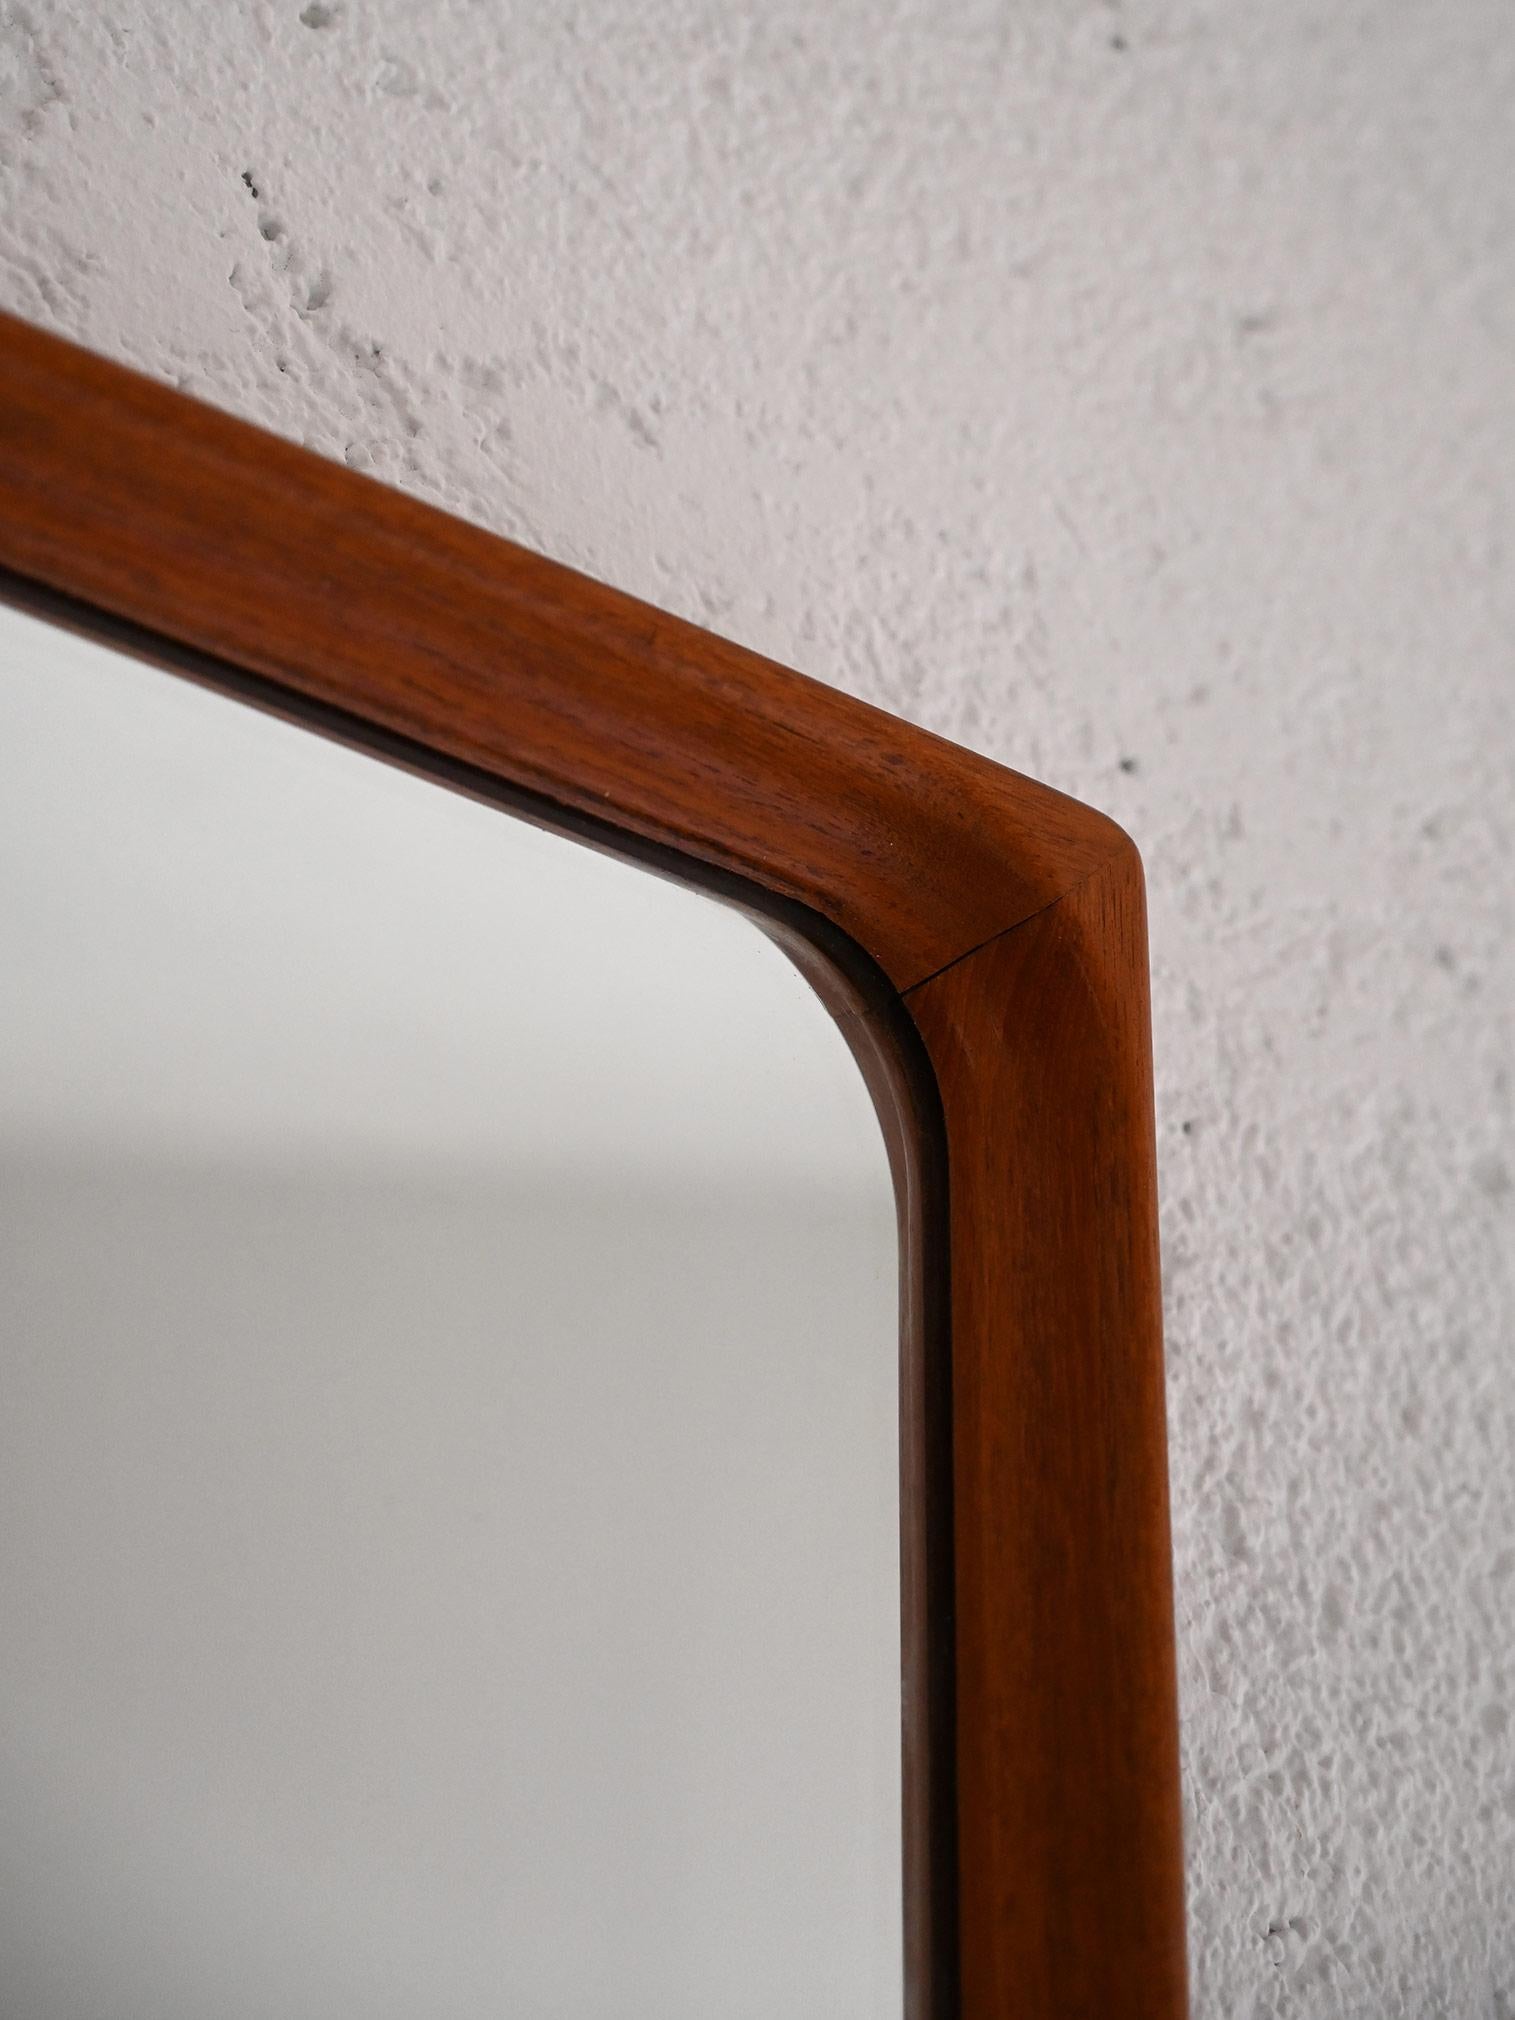 1960s mirror.

This piece of furniture has a wooden frame whose peculiarity lies in the shape of the inner corners that are rounded. A mirror that will give character and style to the room.

Good condition. It may show some signs of time. Please pay